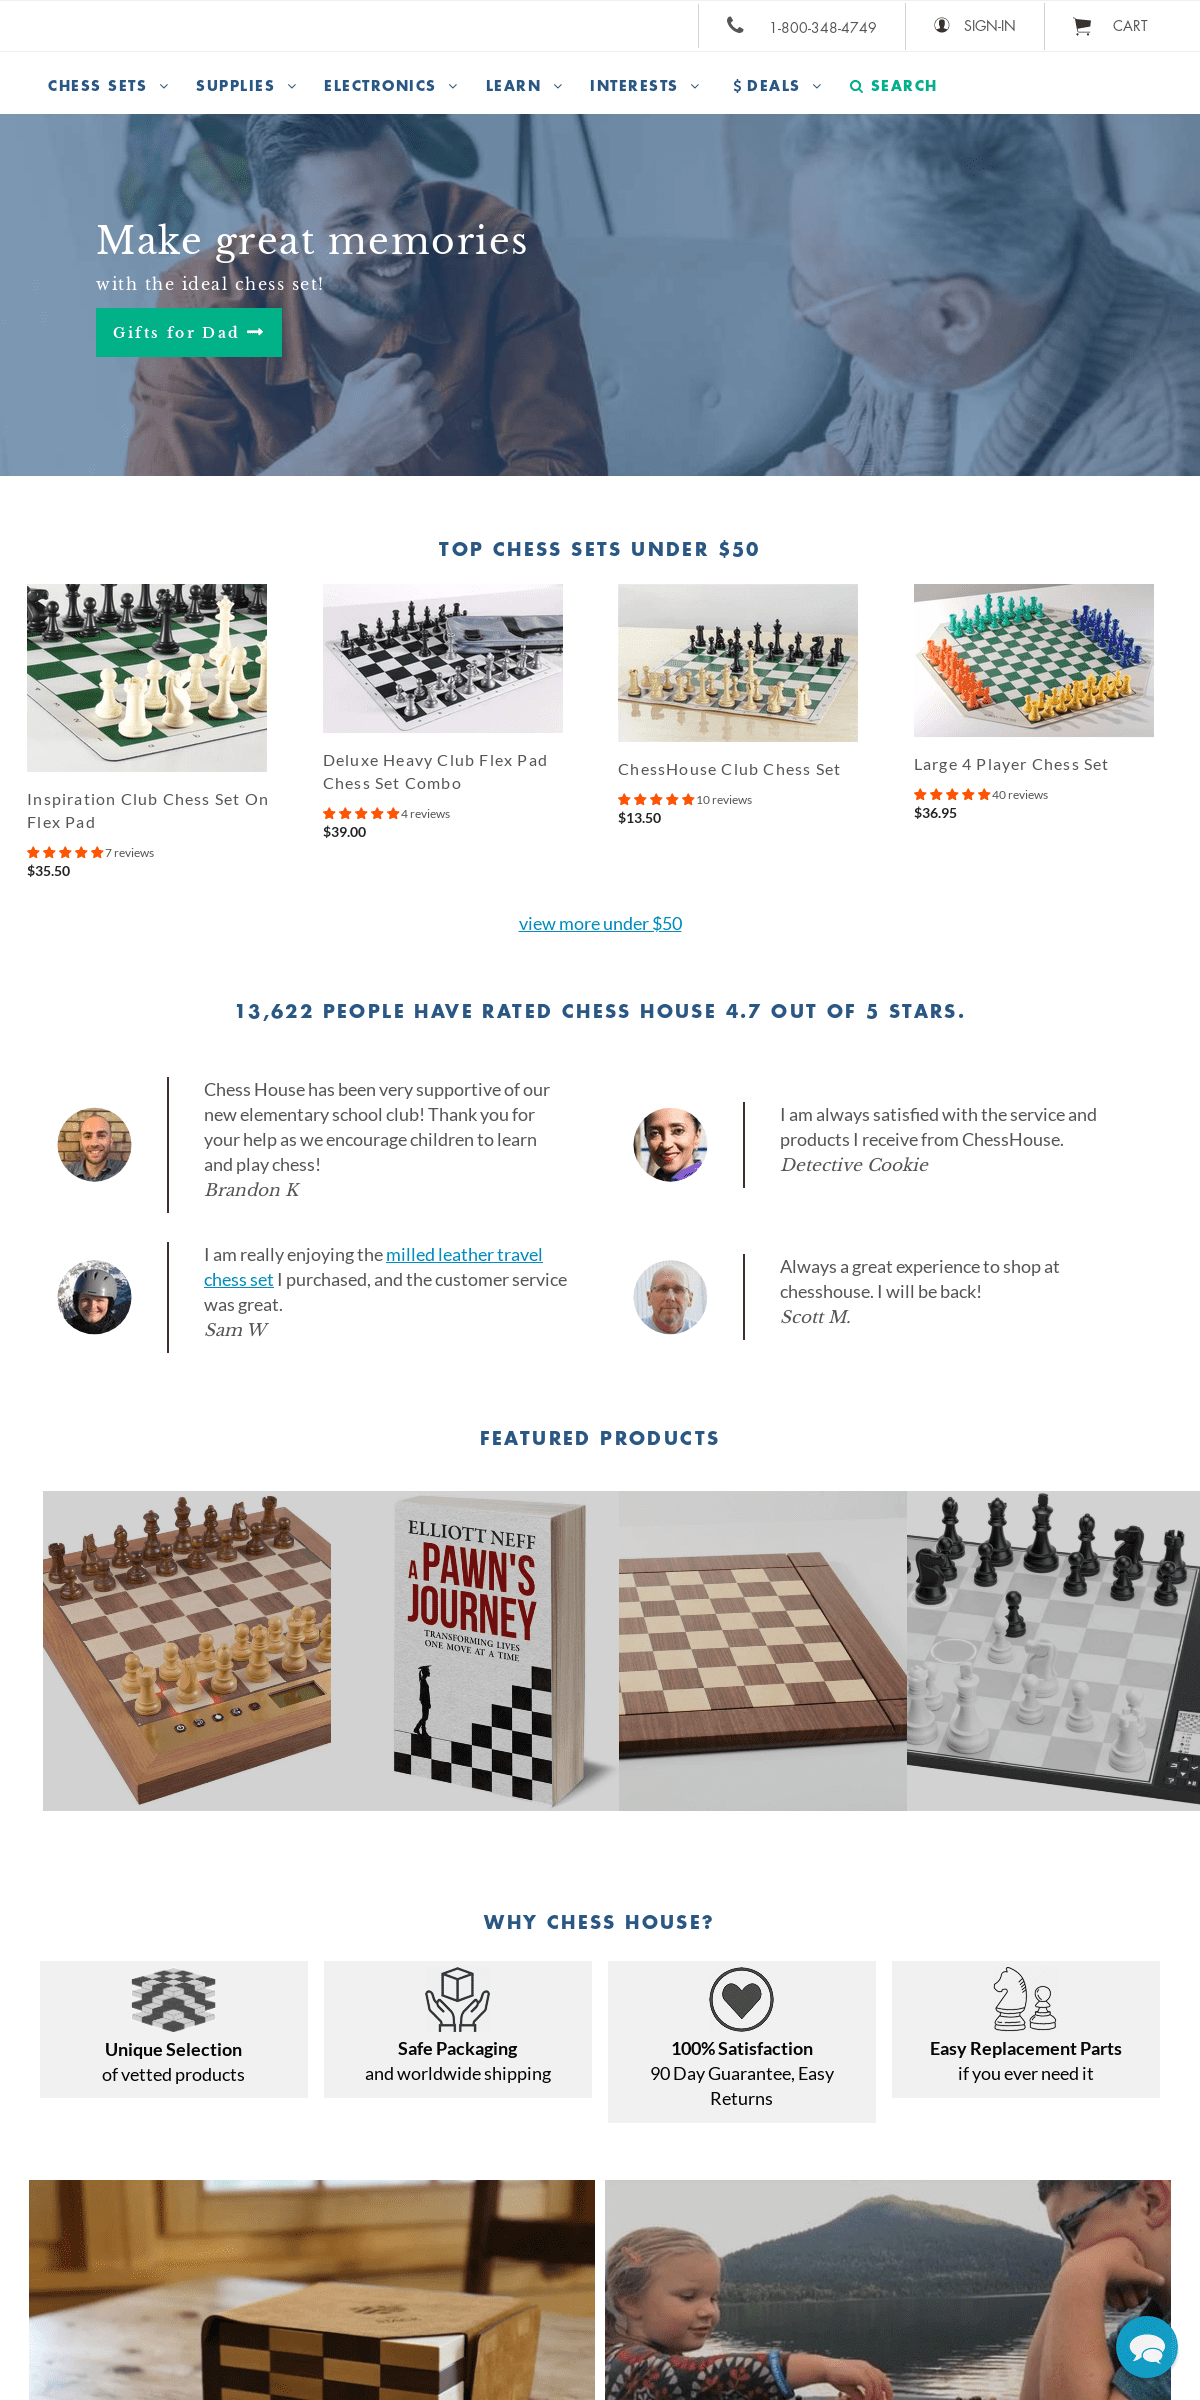 A complete backup of chesshouse.com